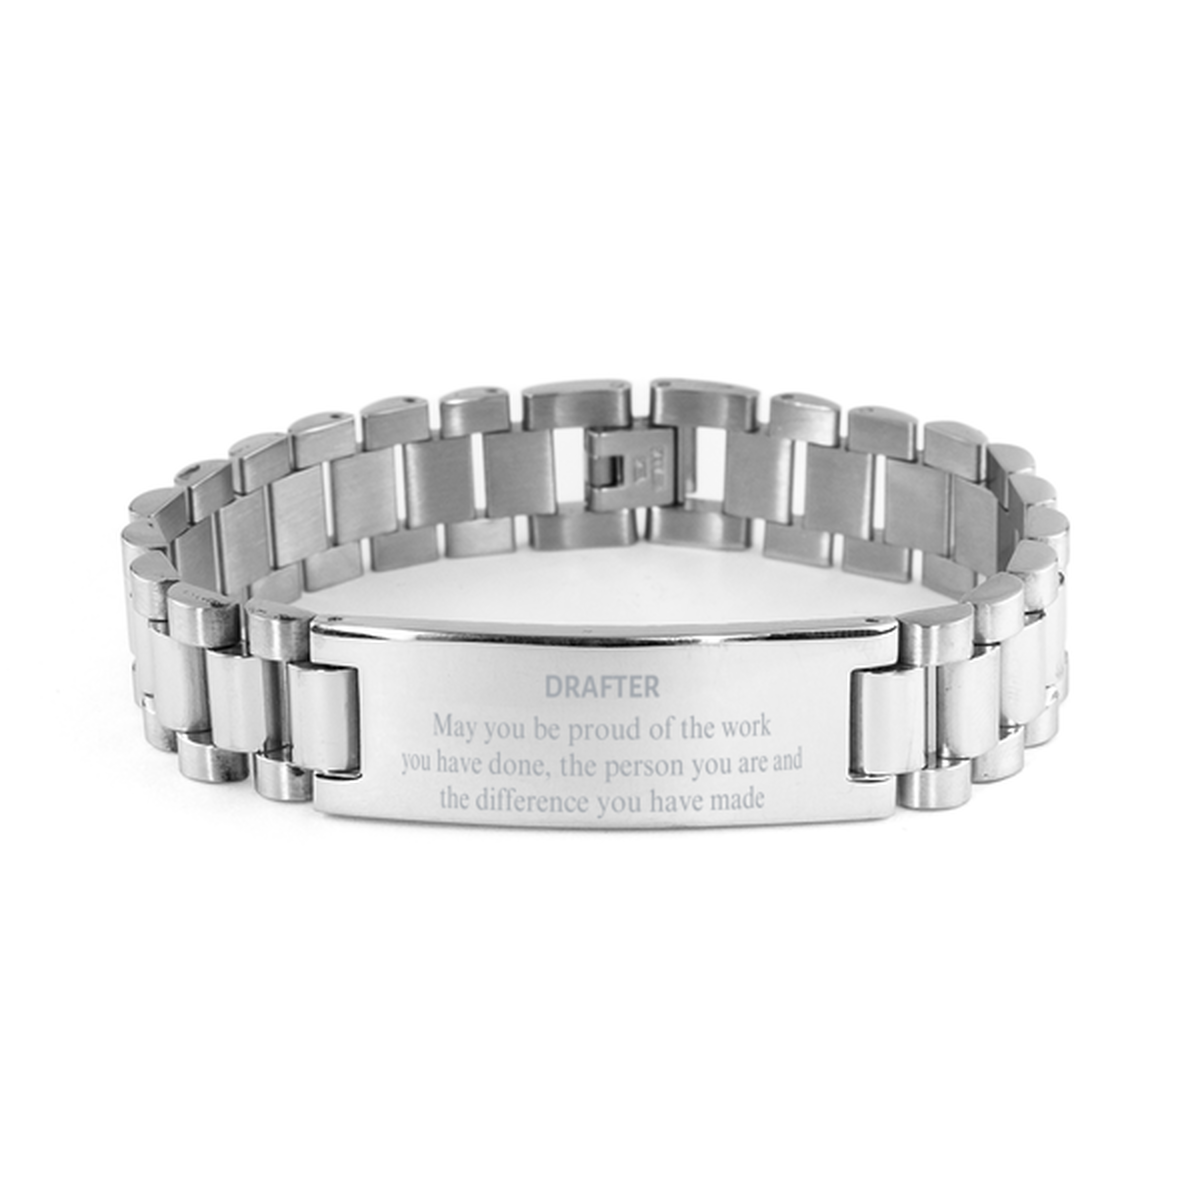 Drafter May you be proud of the work you have done, Retirement Drafter Ladder Stainless Steel Bracelet for Colleague Appreciation Gifts Amazing for Drafter